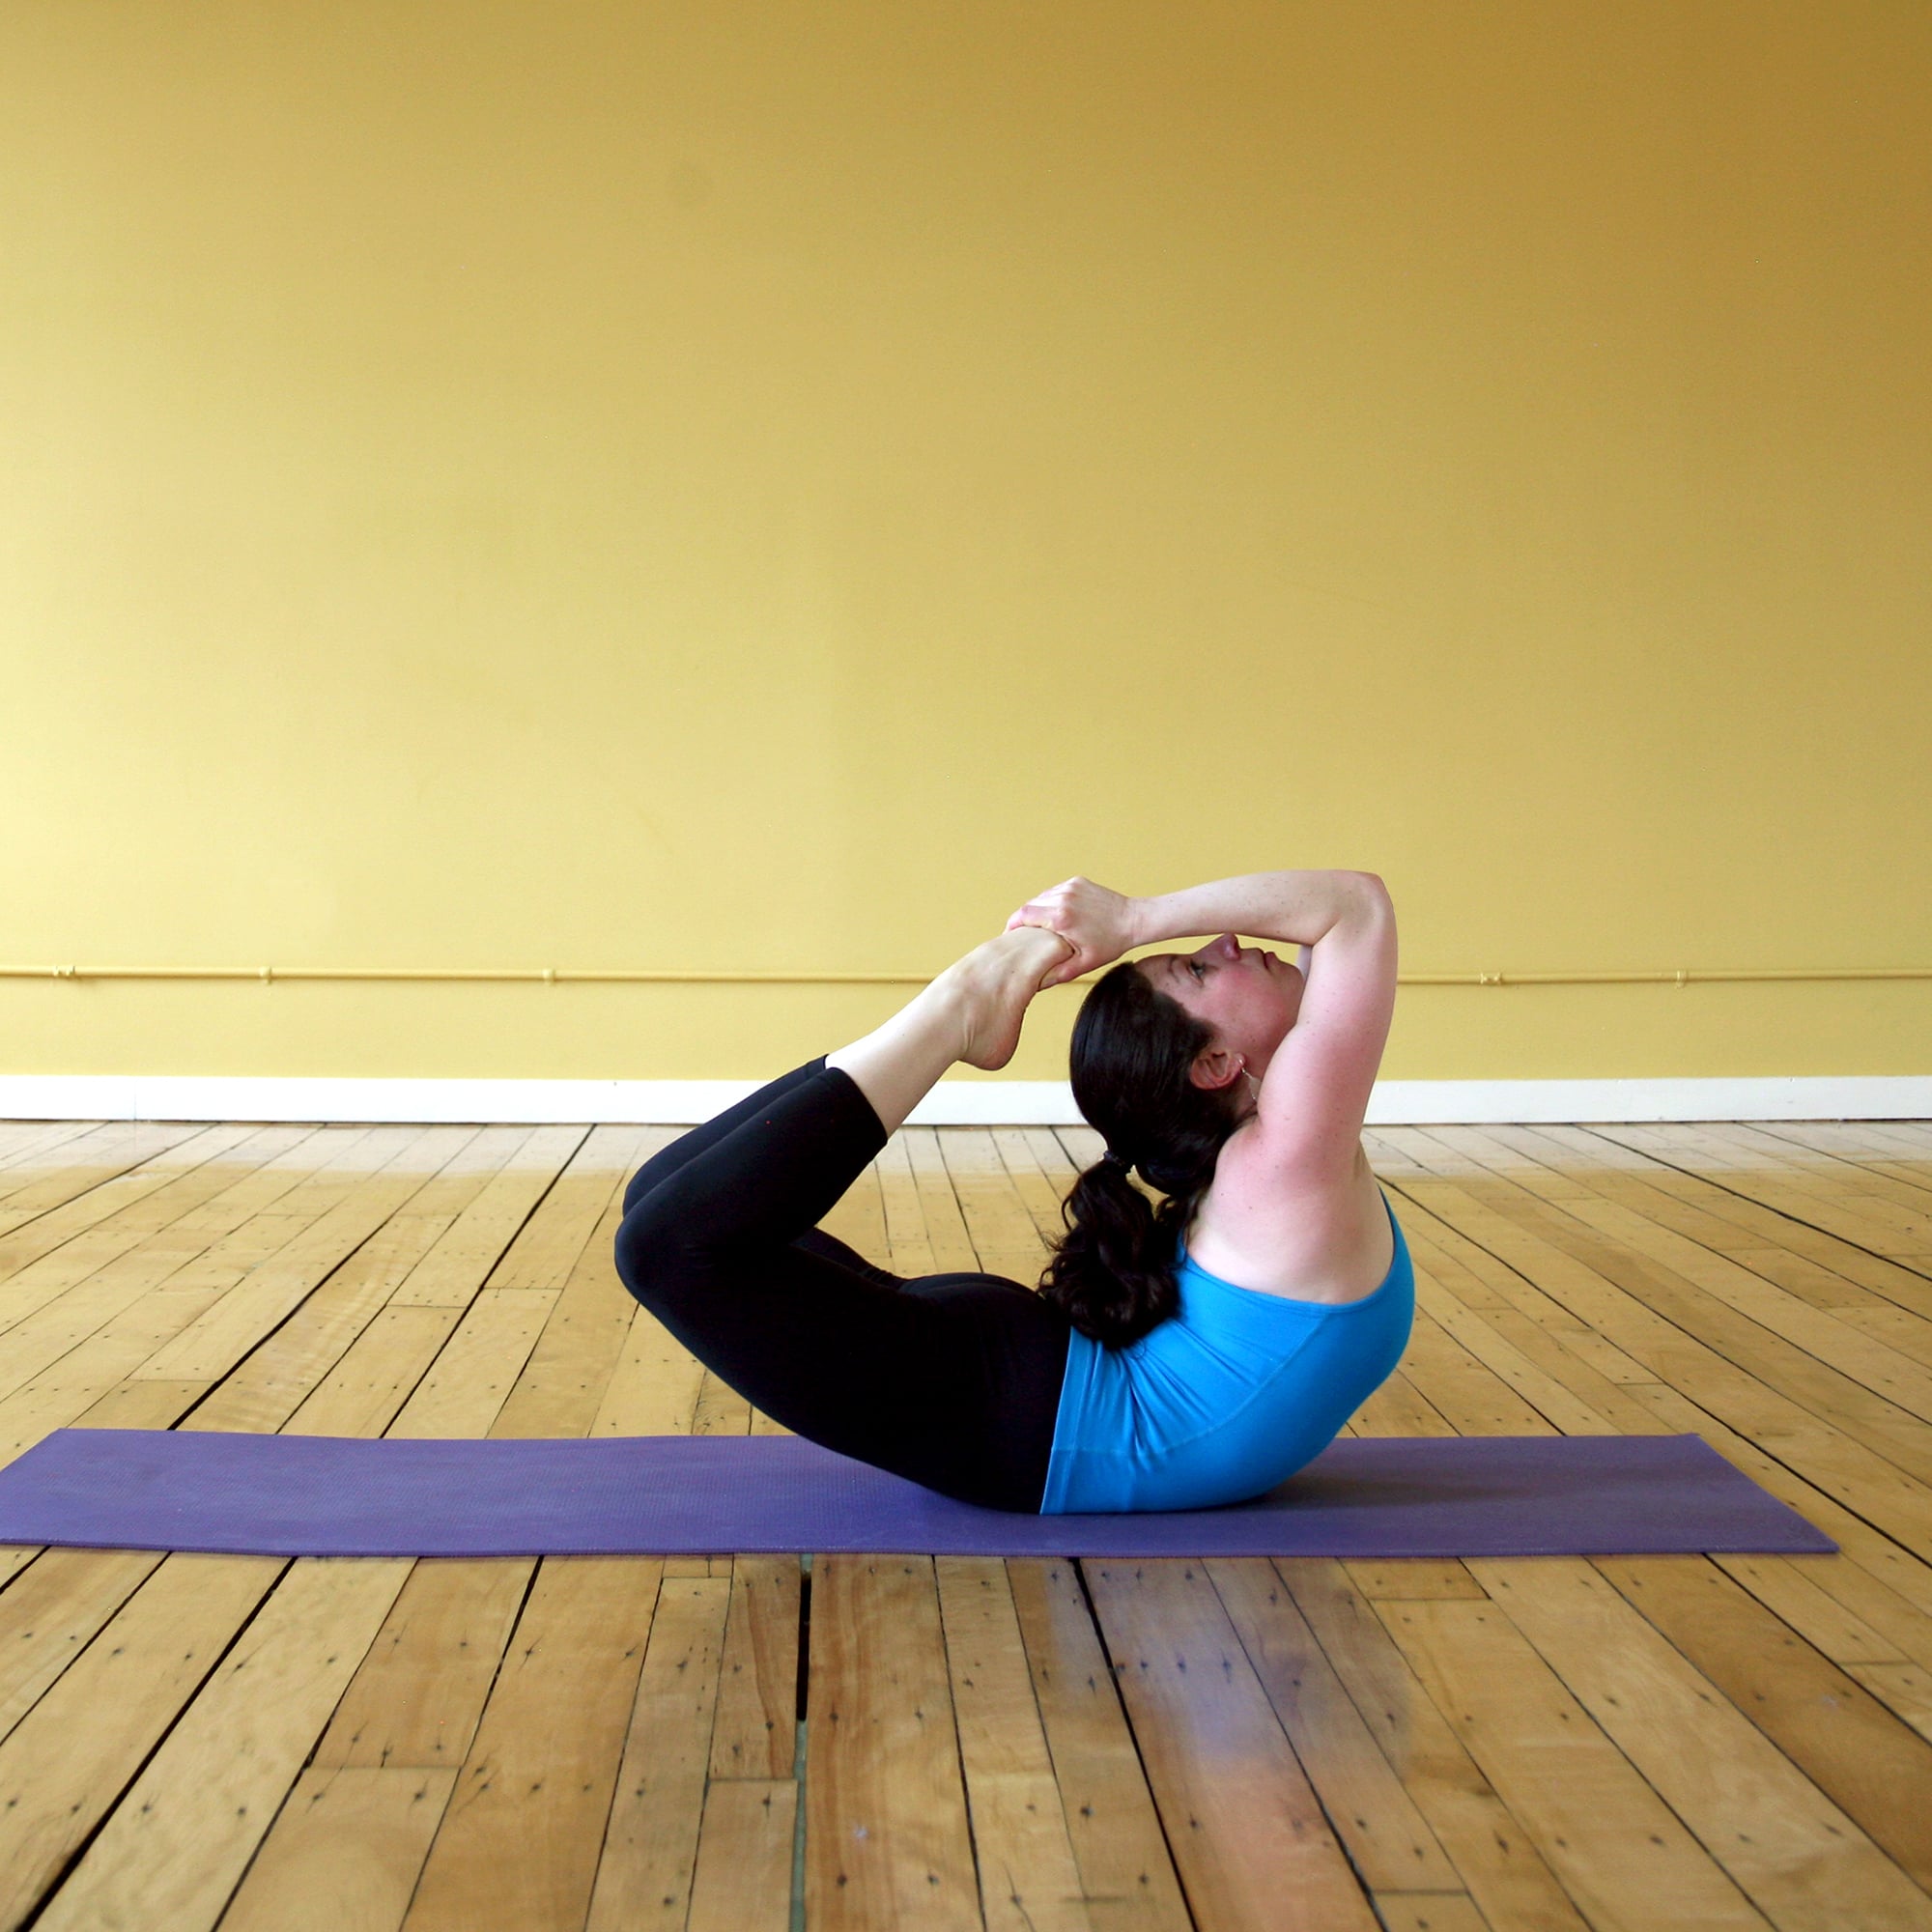 9 Difficult Yoga Poses to Level Up Your Asanas